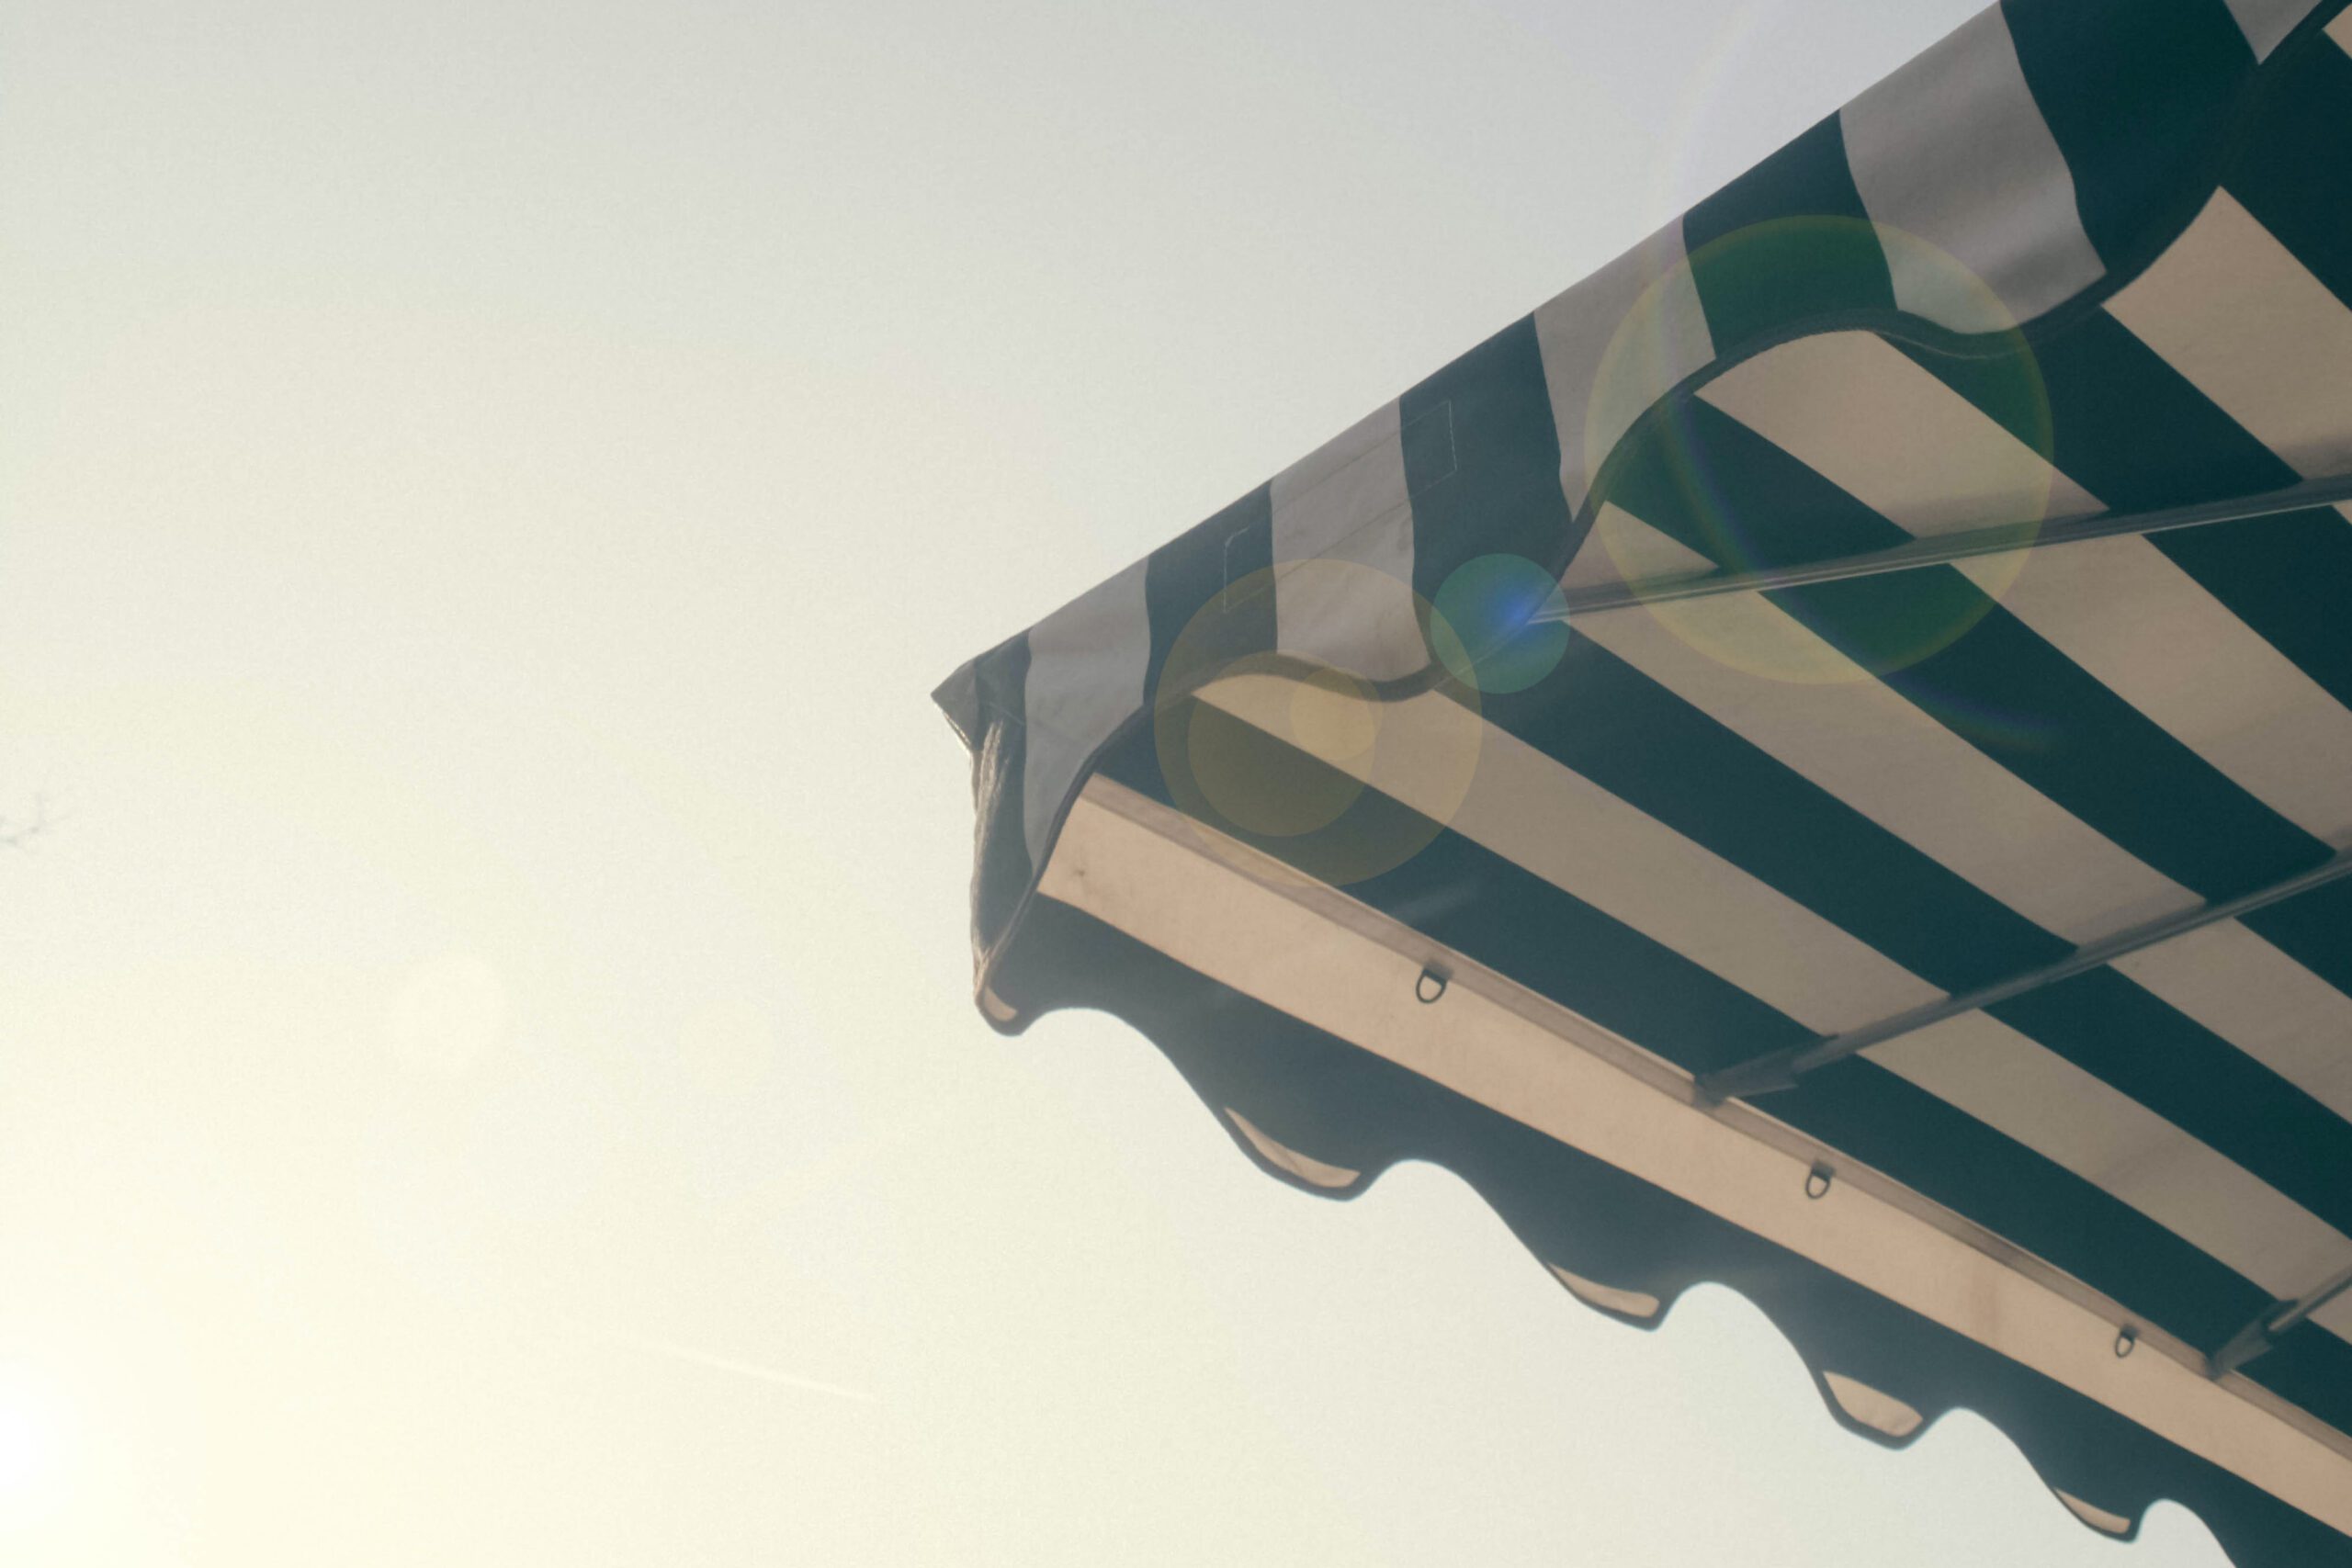 corner of a green striped awning